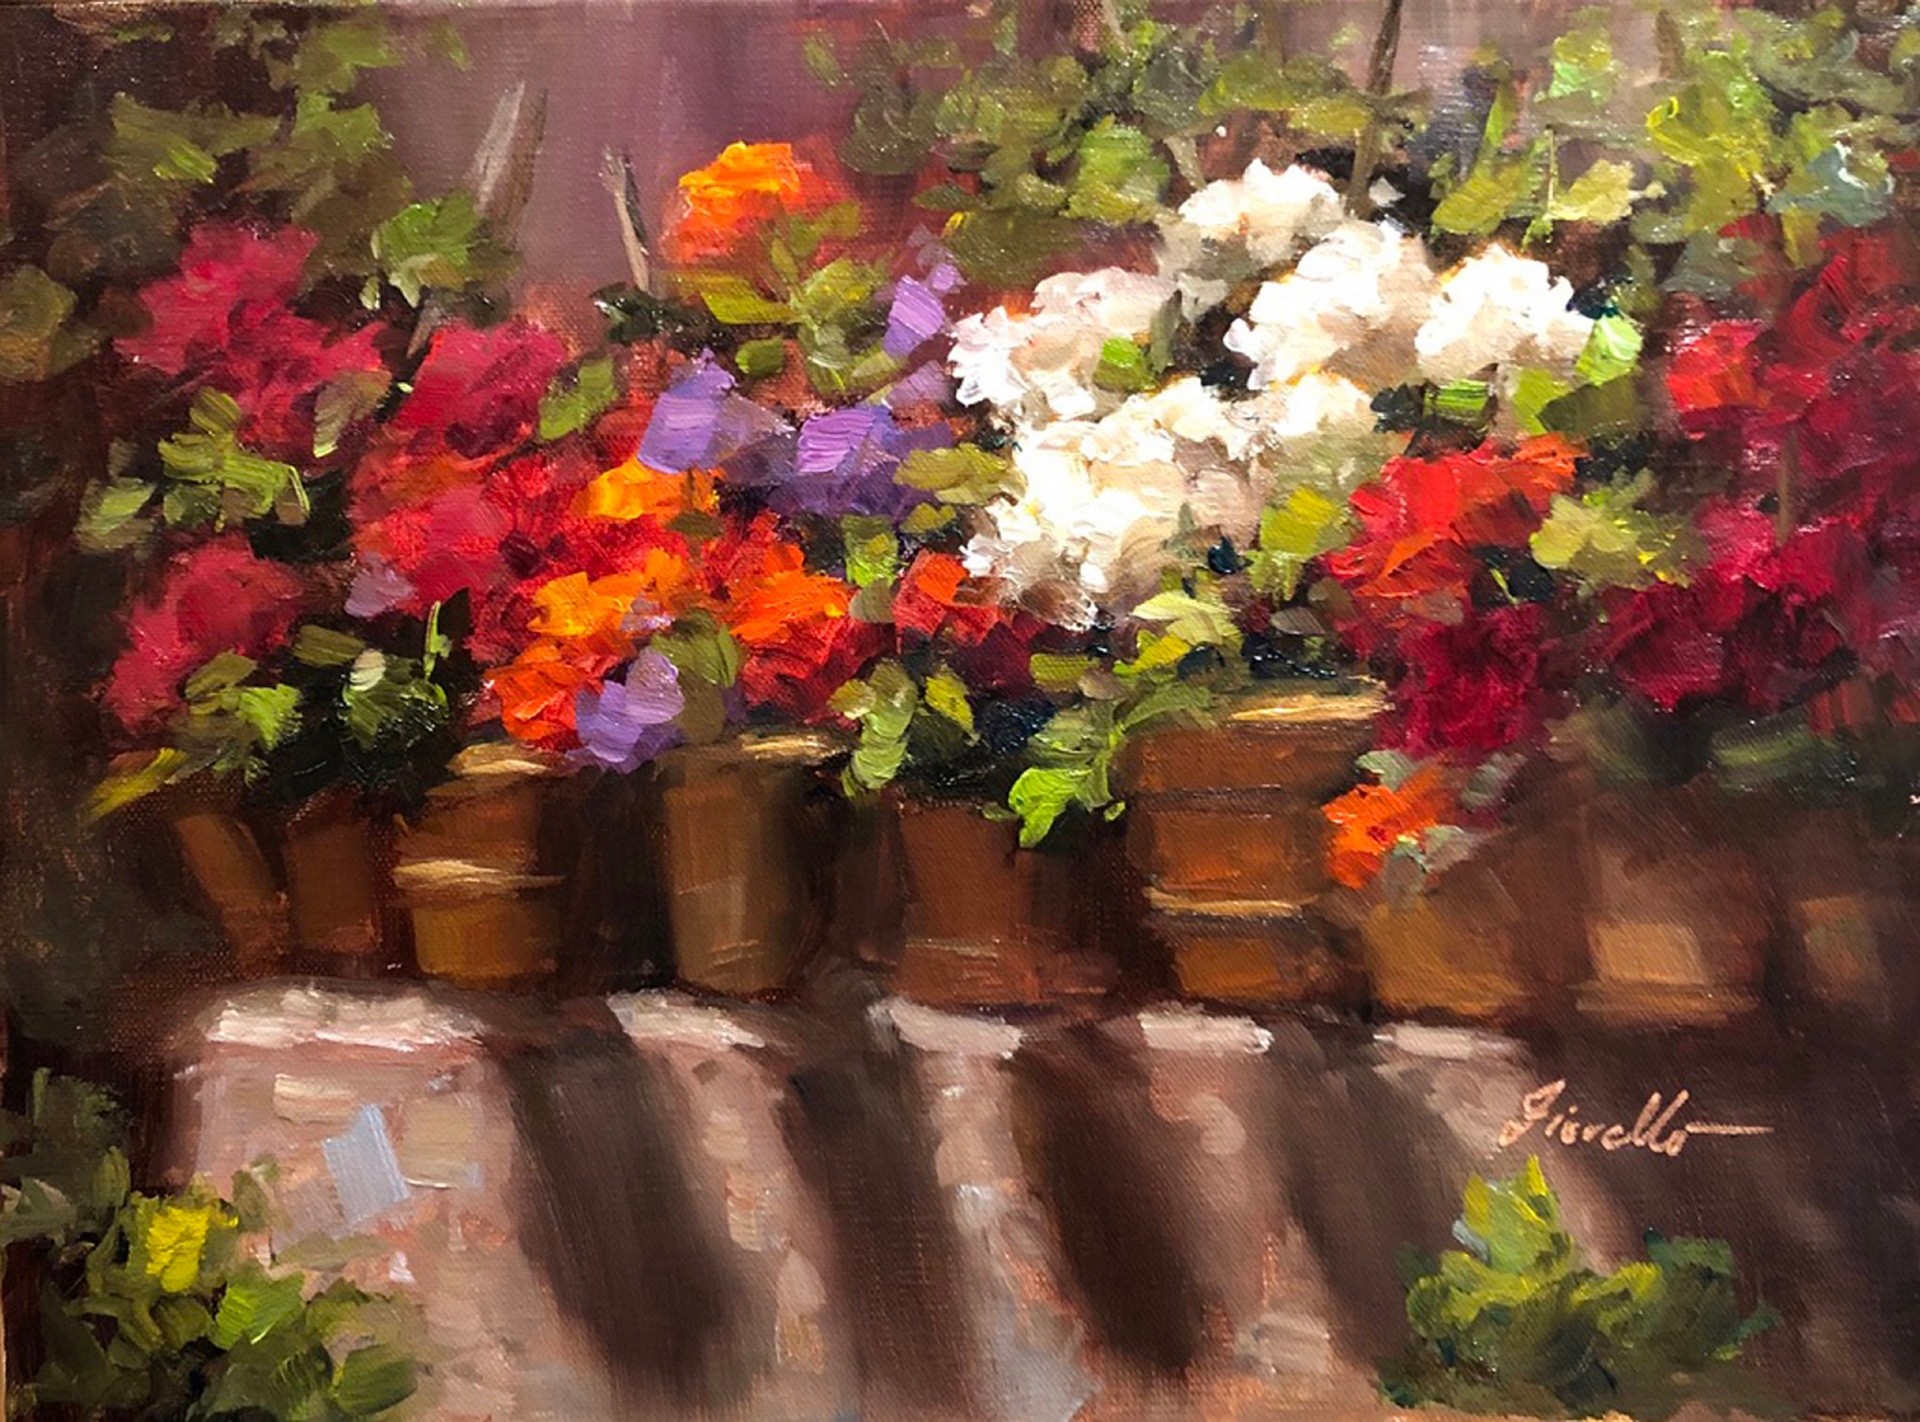 13th Annual PleinAir Salon Annual Competition Top 25 Finalist Pat Fiorello Wall of Flowers oil painting of potted flowers